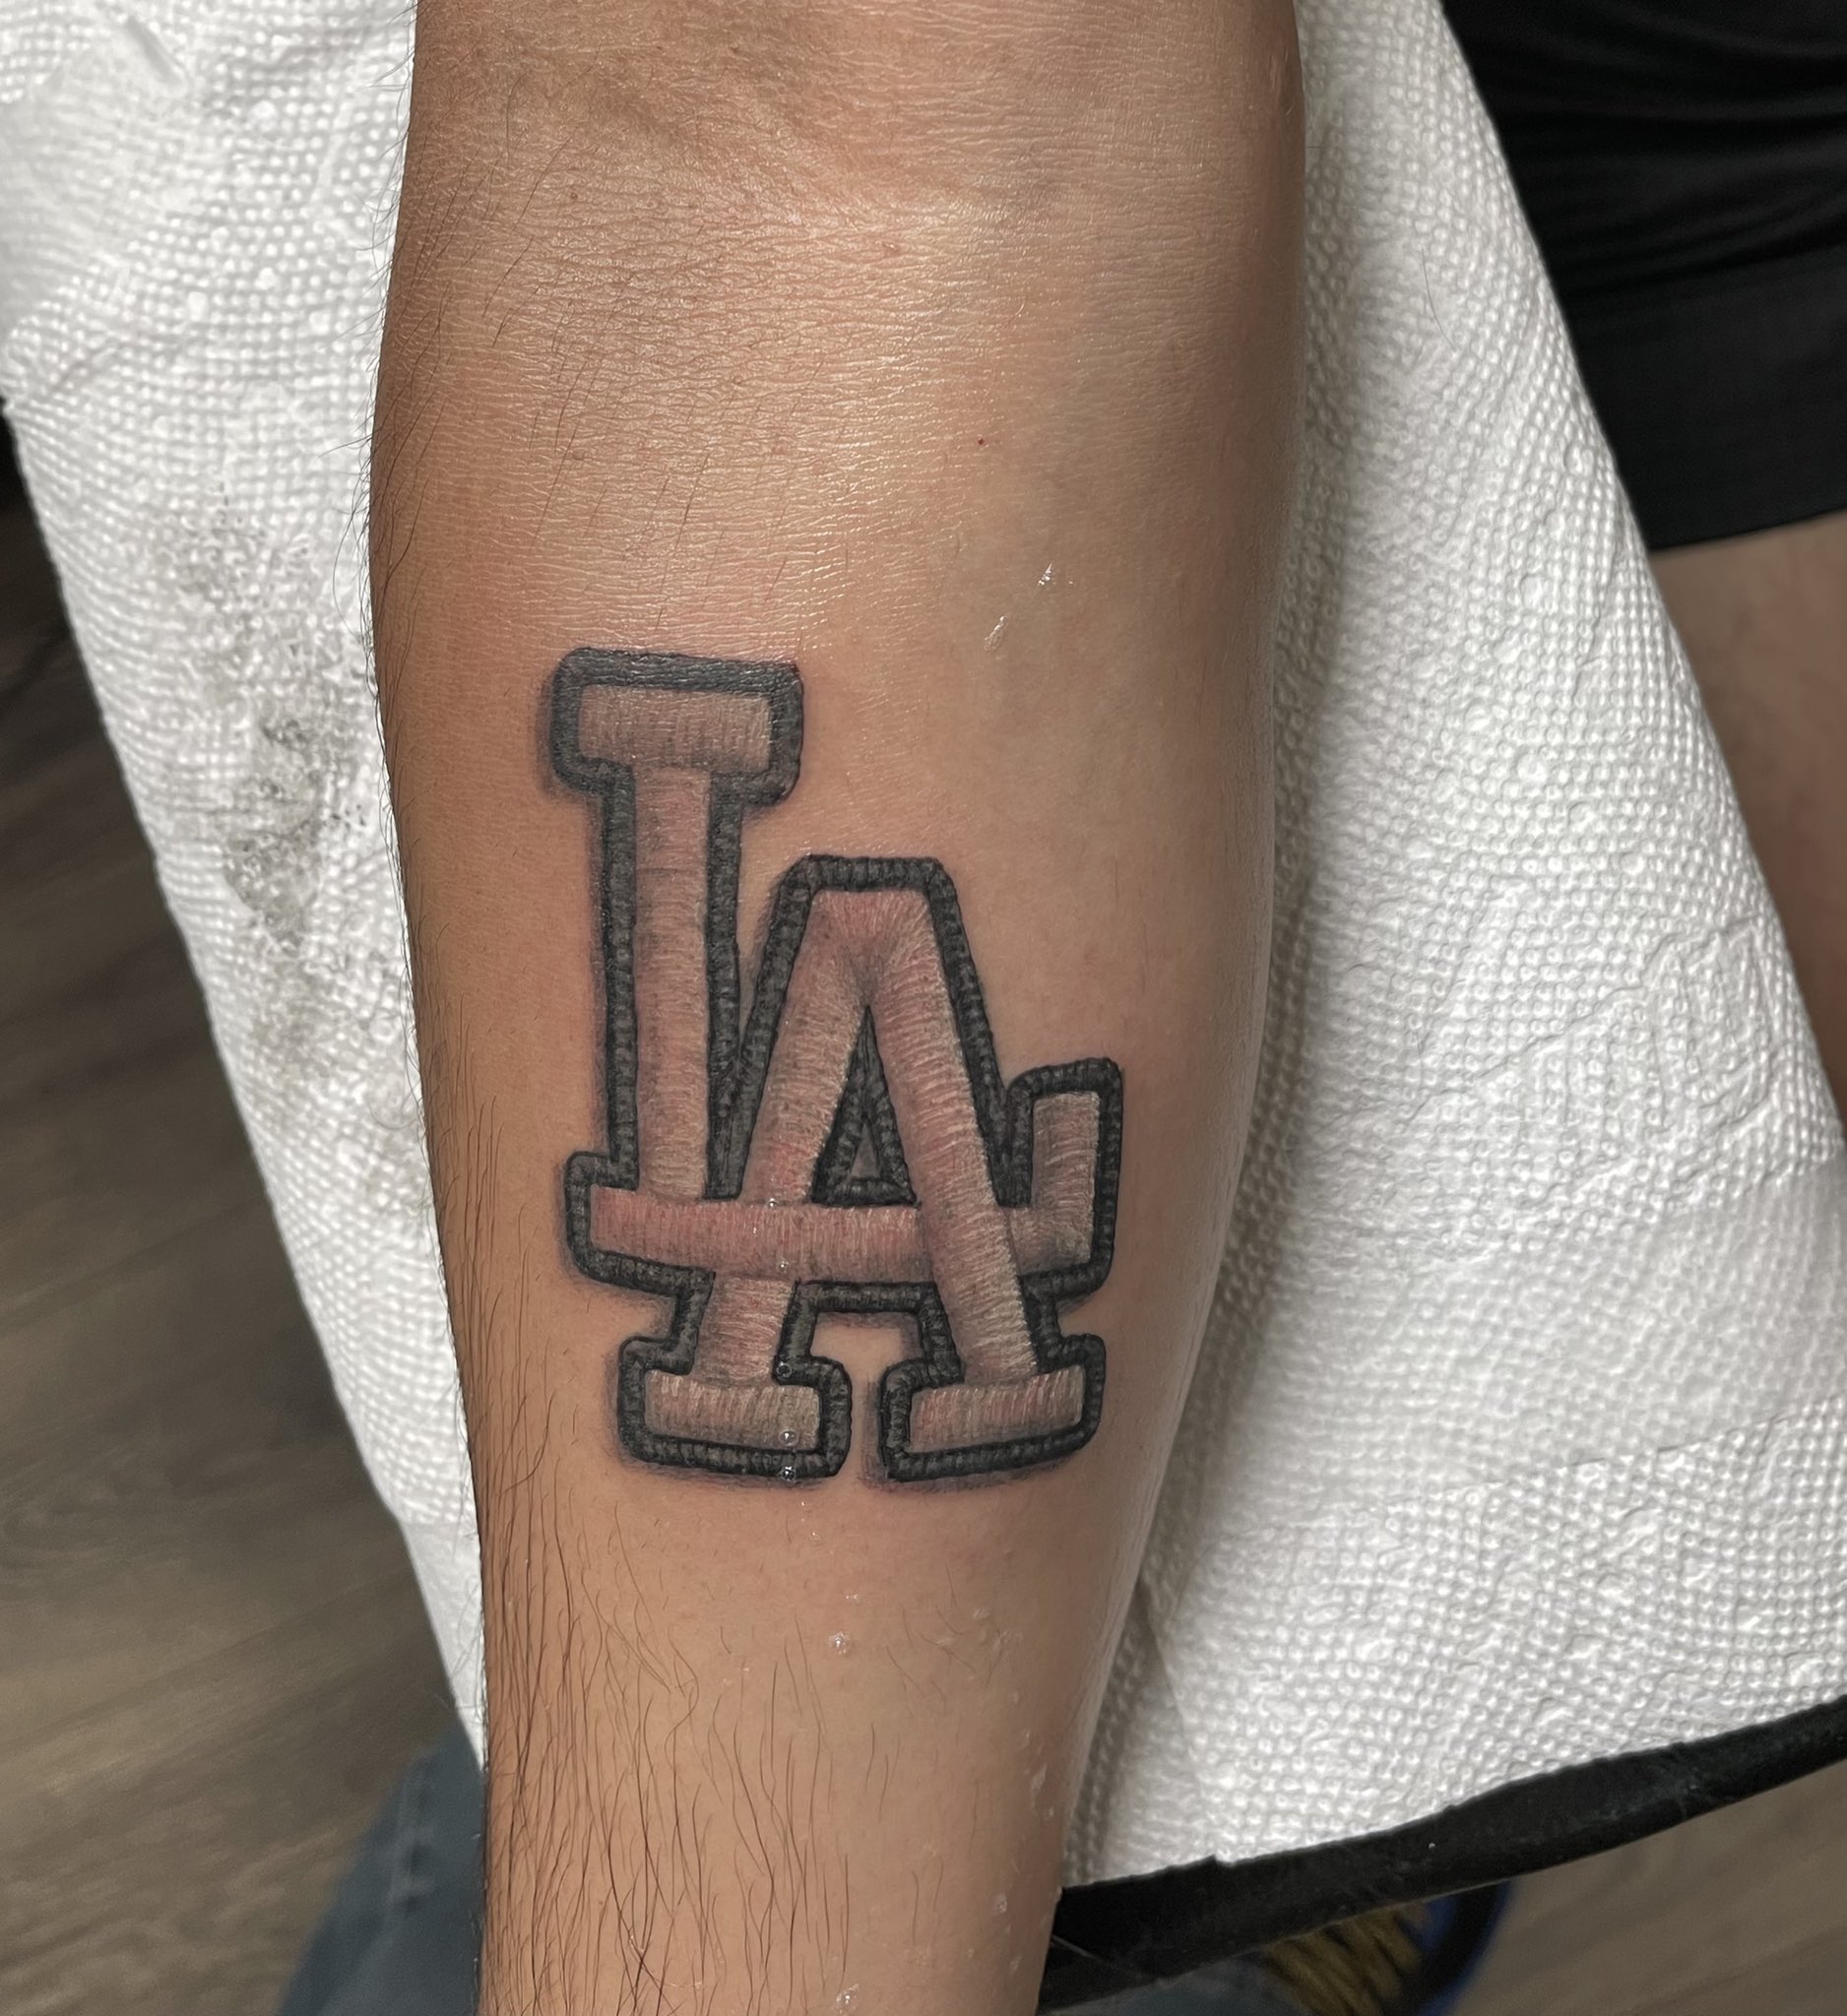 rask-opticon-on-twitter-a-los-angeles-dodgers-logo-in-embroidery-style-tattoo-embroidery-rask-dodgerstattoo-sports-baseballtattoo-embroiderytattoo-losangelesdodgers-baseball-raskopticon-tattoo-https-t-co-inhzqze4oi-twitter